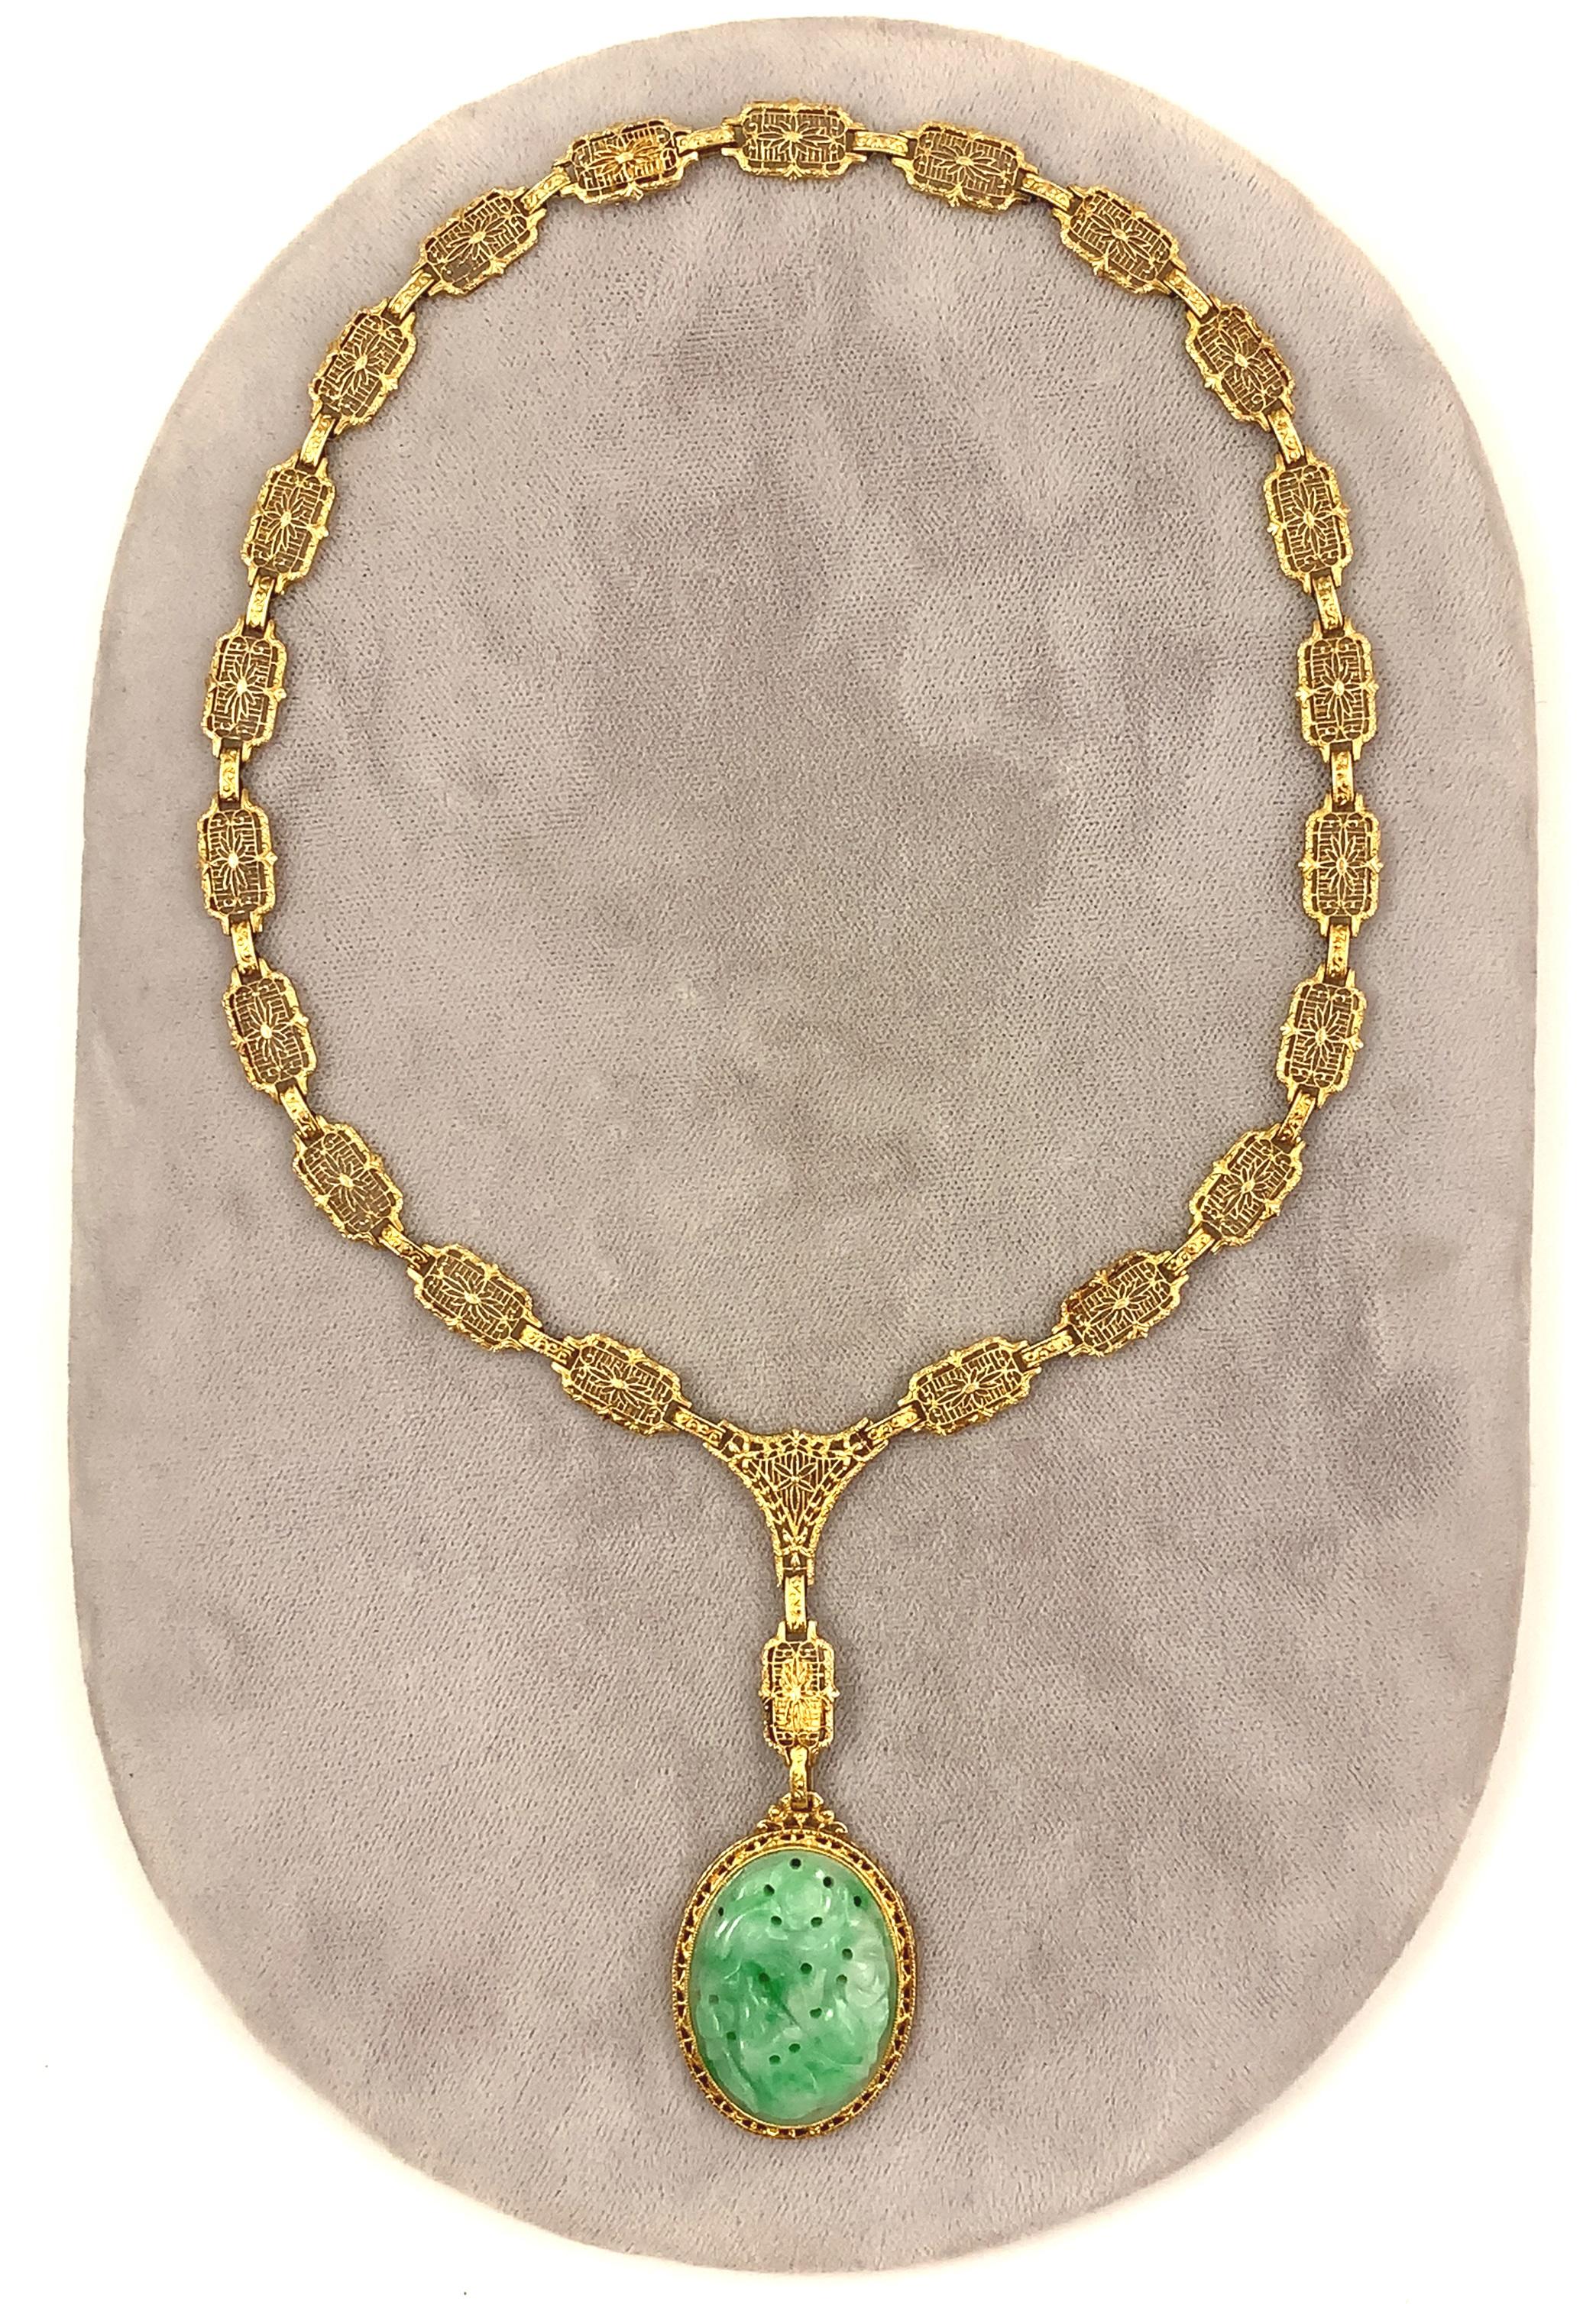 Art Deco 14K yellow gold pendant featuring a beautiful carved oval jadeite jade. Includes GIA report #6223435637 stating translucent green A jade, not dyed.  The jade measures 26.80mm x 20.20mm x 4.40mm. The necklace is comprised of 23 cast filigree